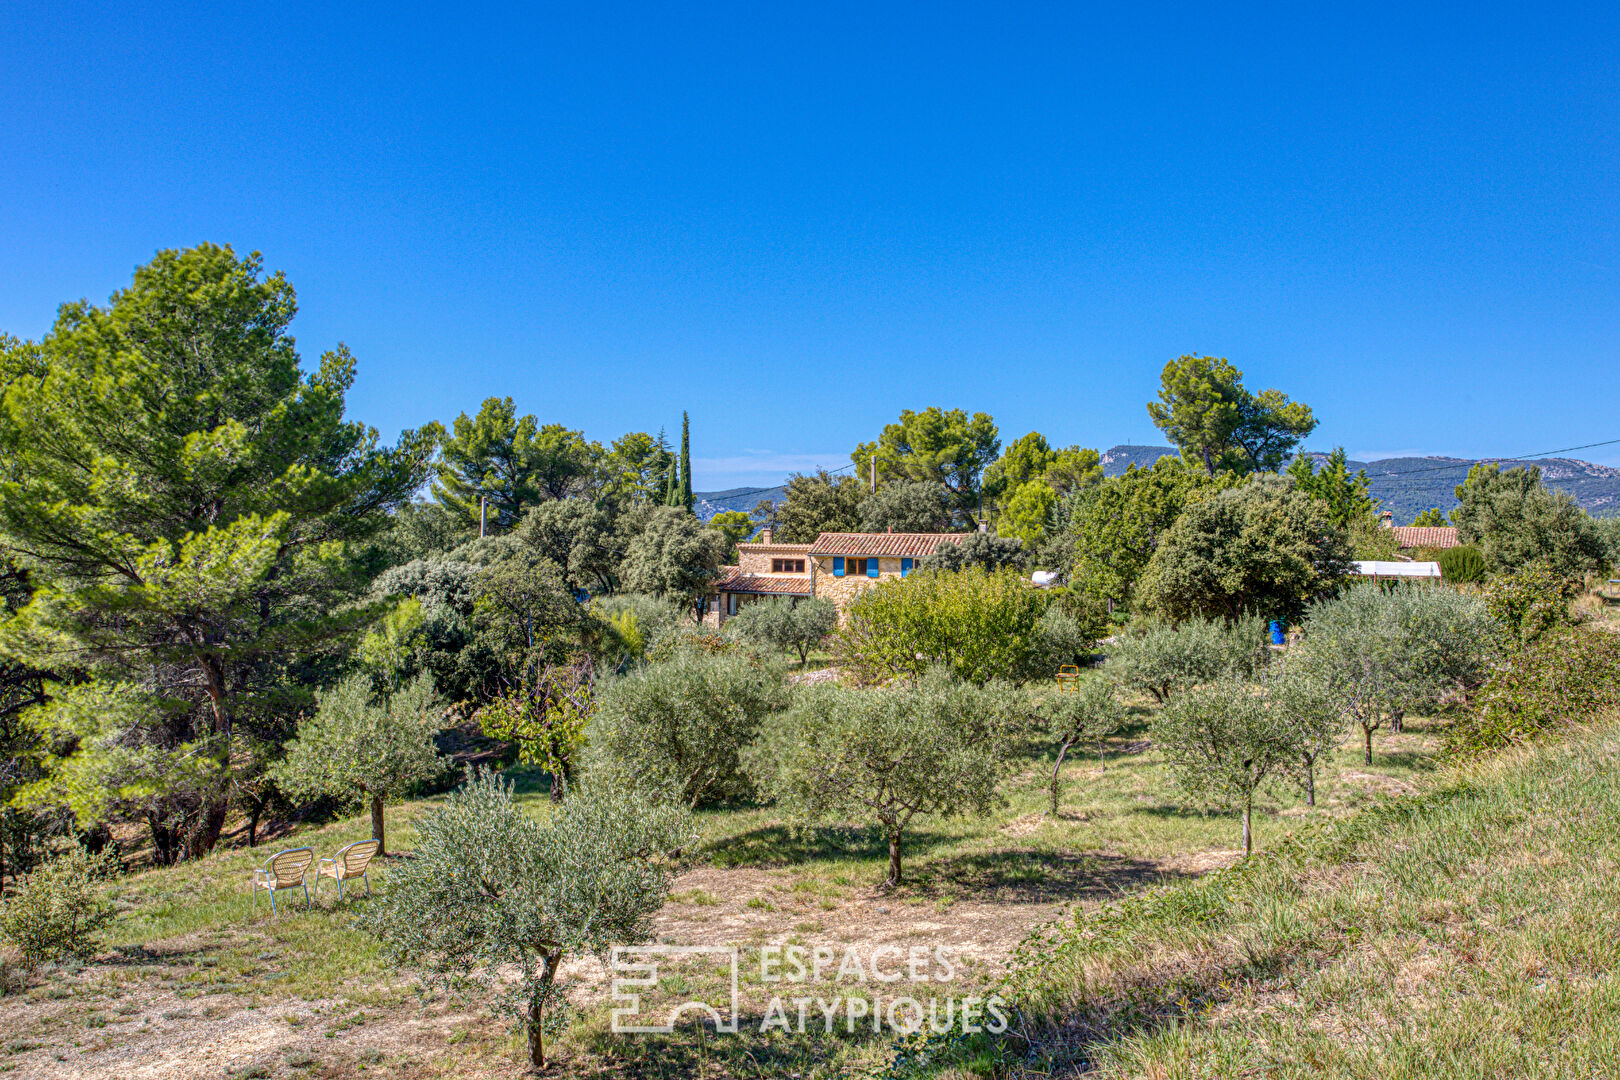 Two stone houses in an olive grove